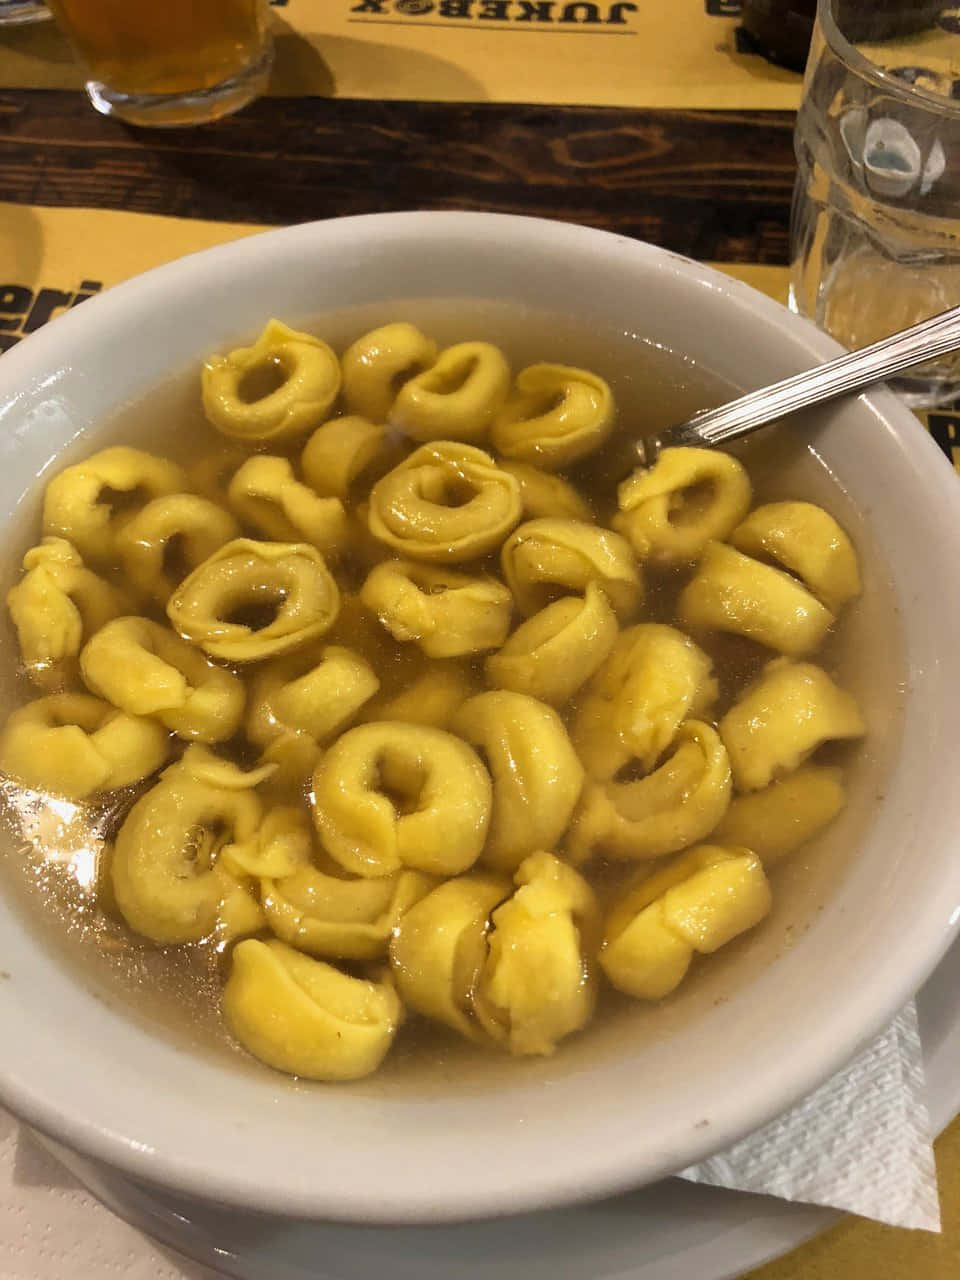 Authentic Tortellini In Brodo served in a restaurant Wallpaper